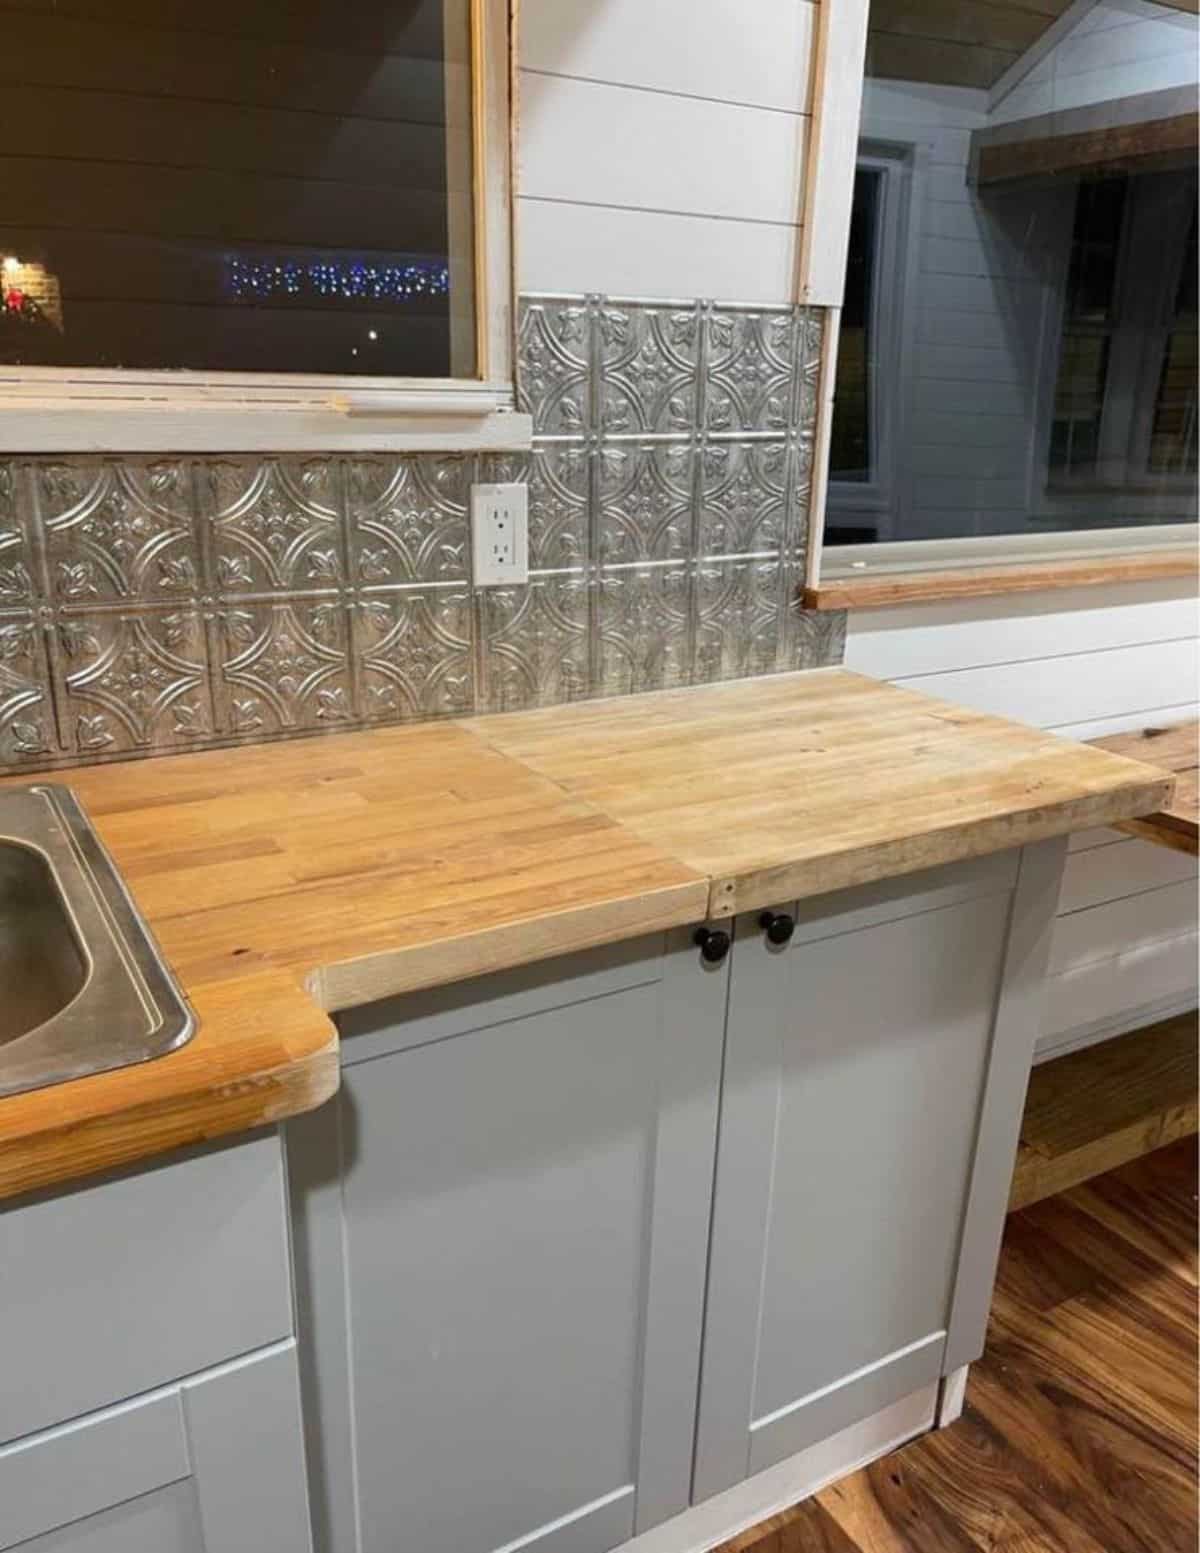 huge countertop with storage cabinets in the kitchen area